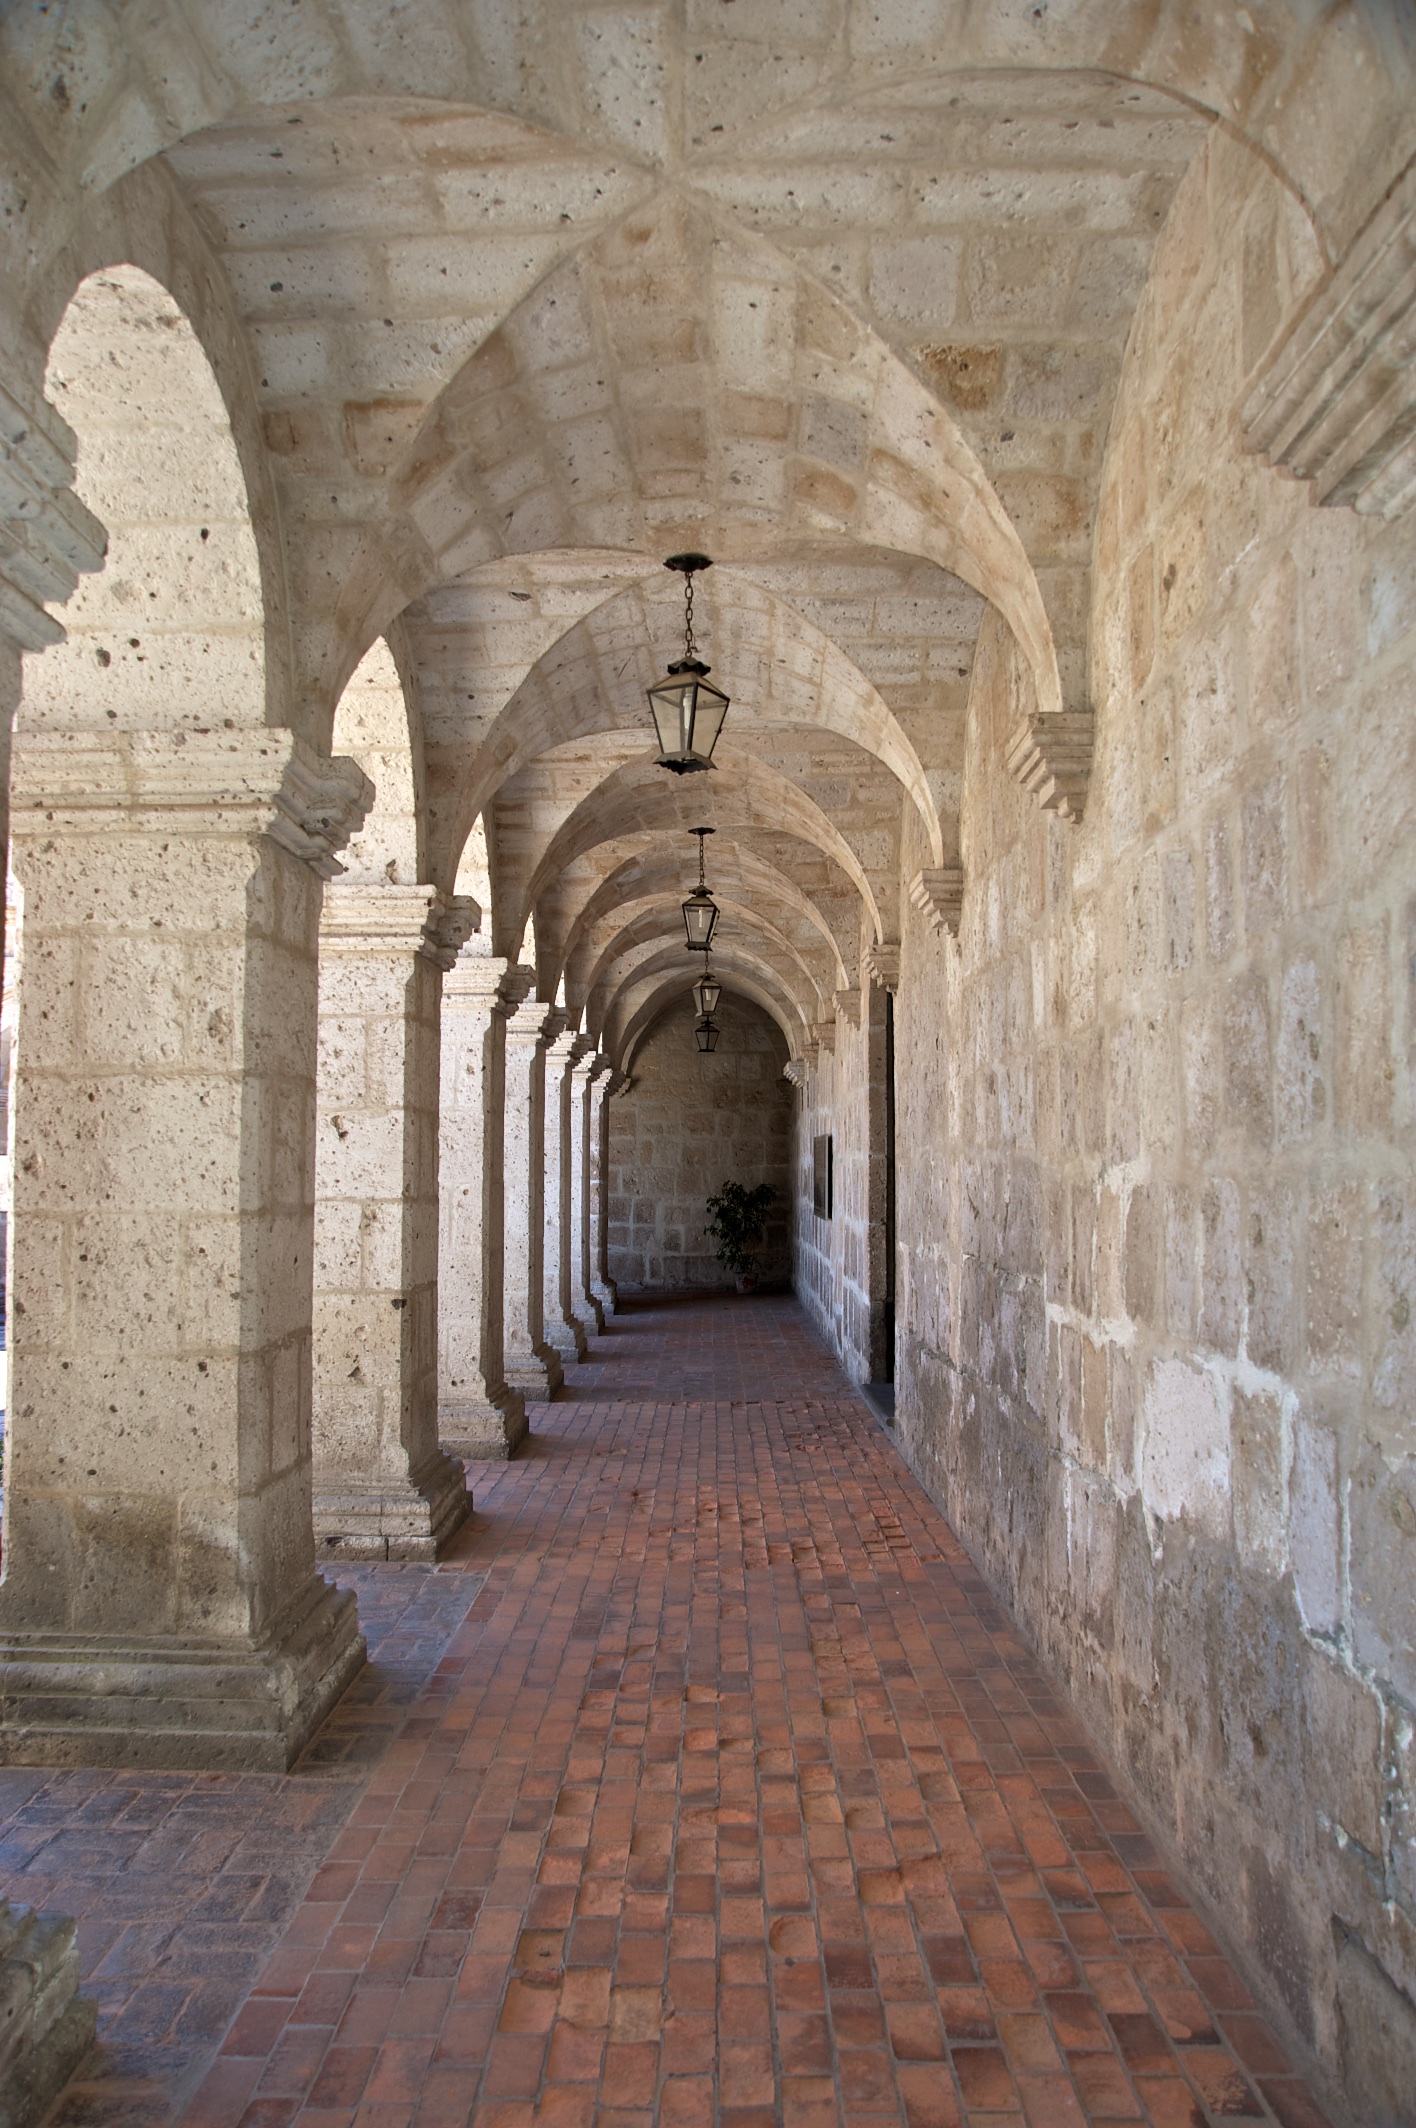  Arches in the Cloisters of the Compania, Arequipa, Peru 